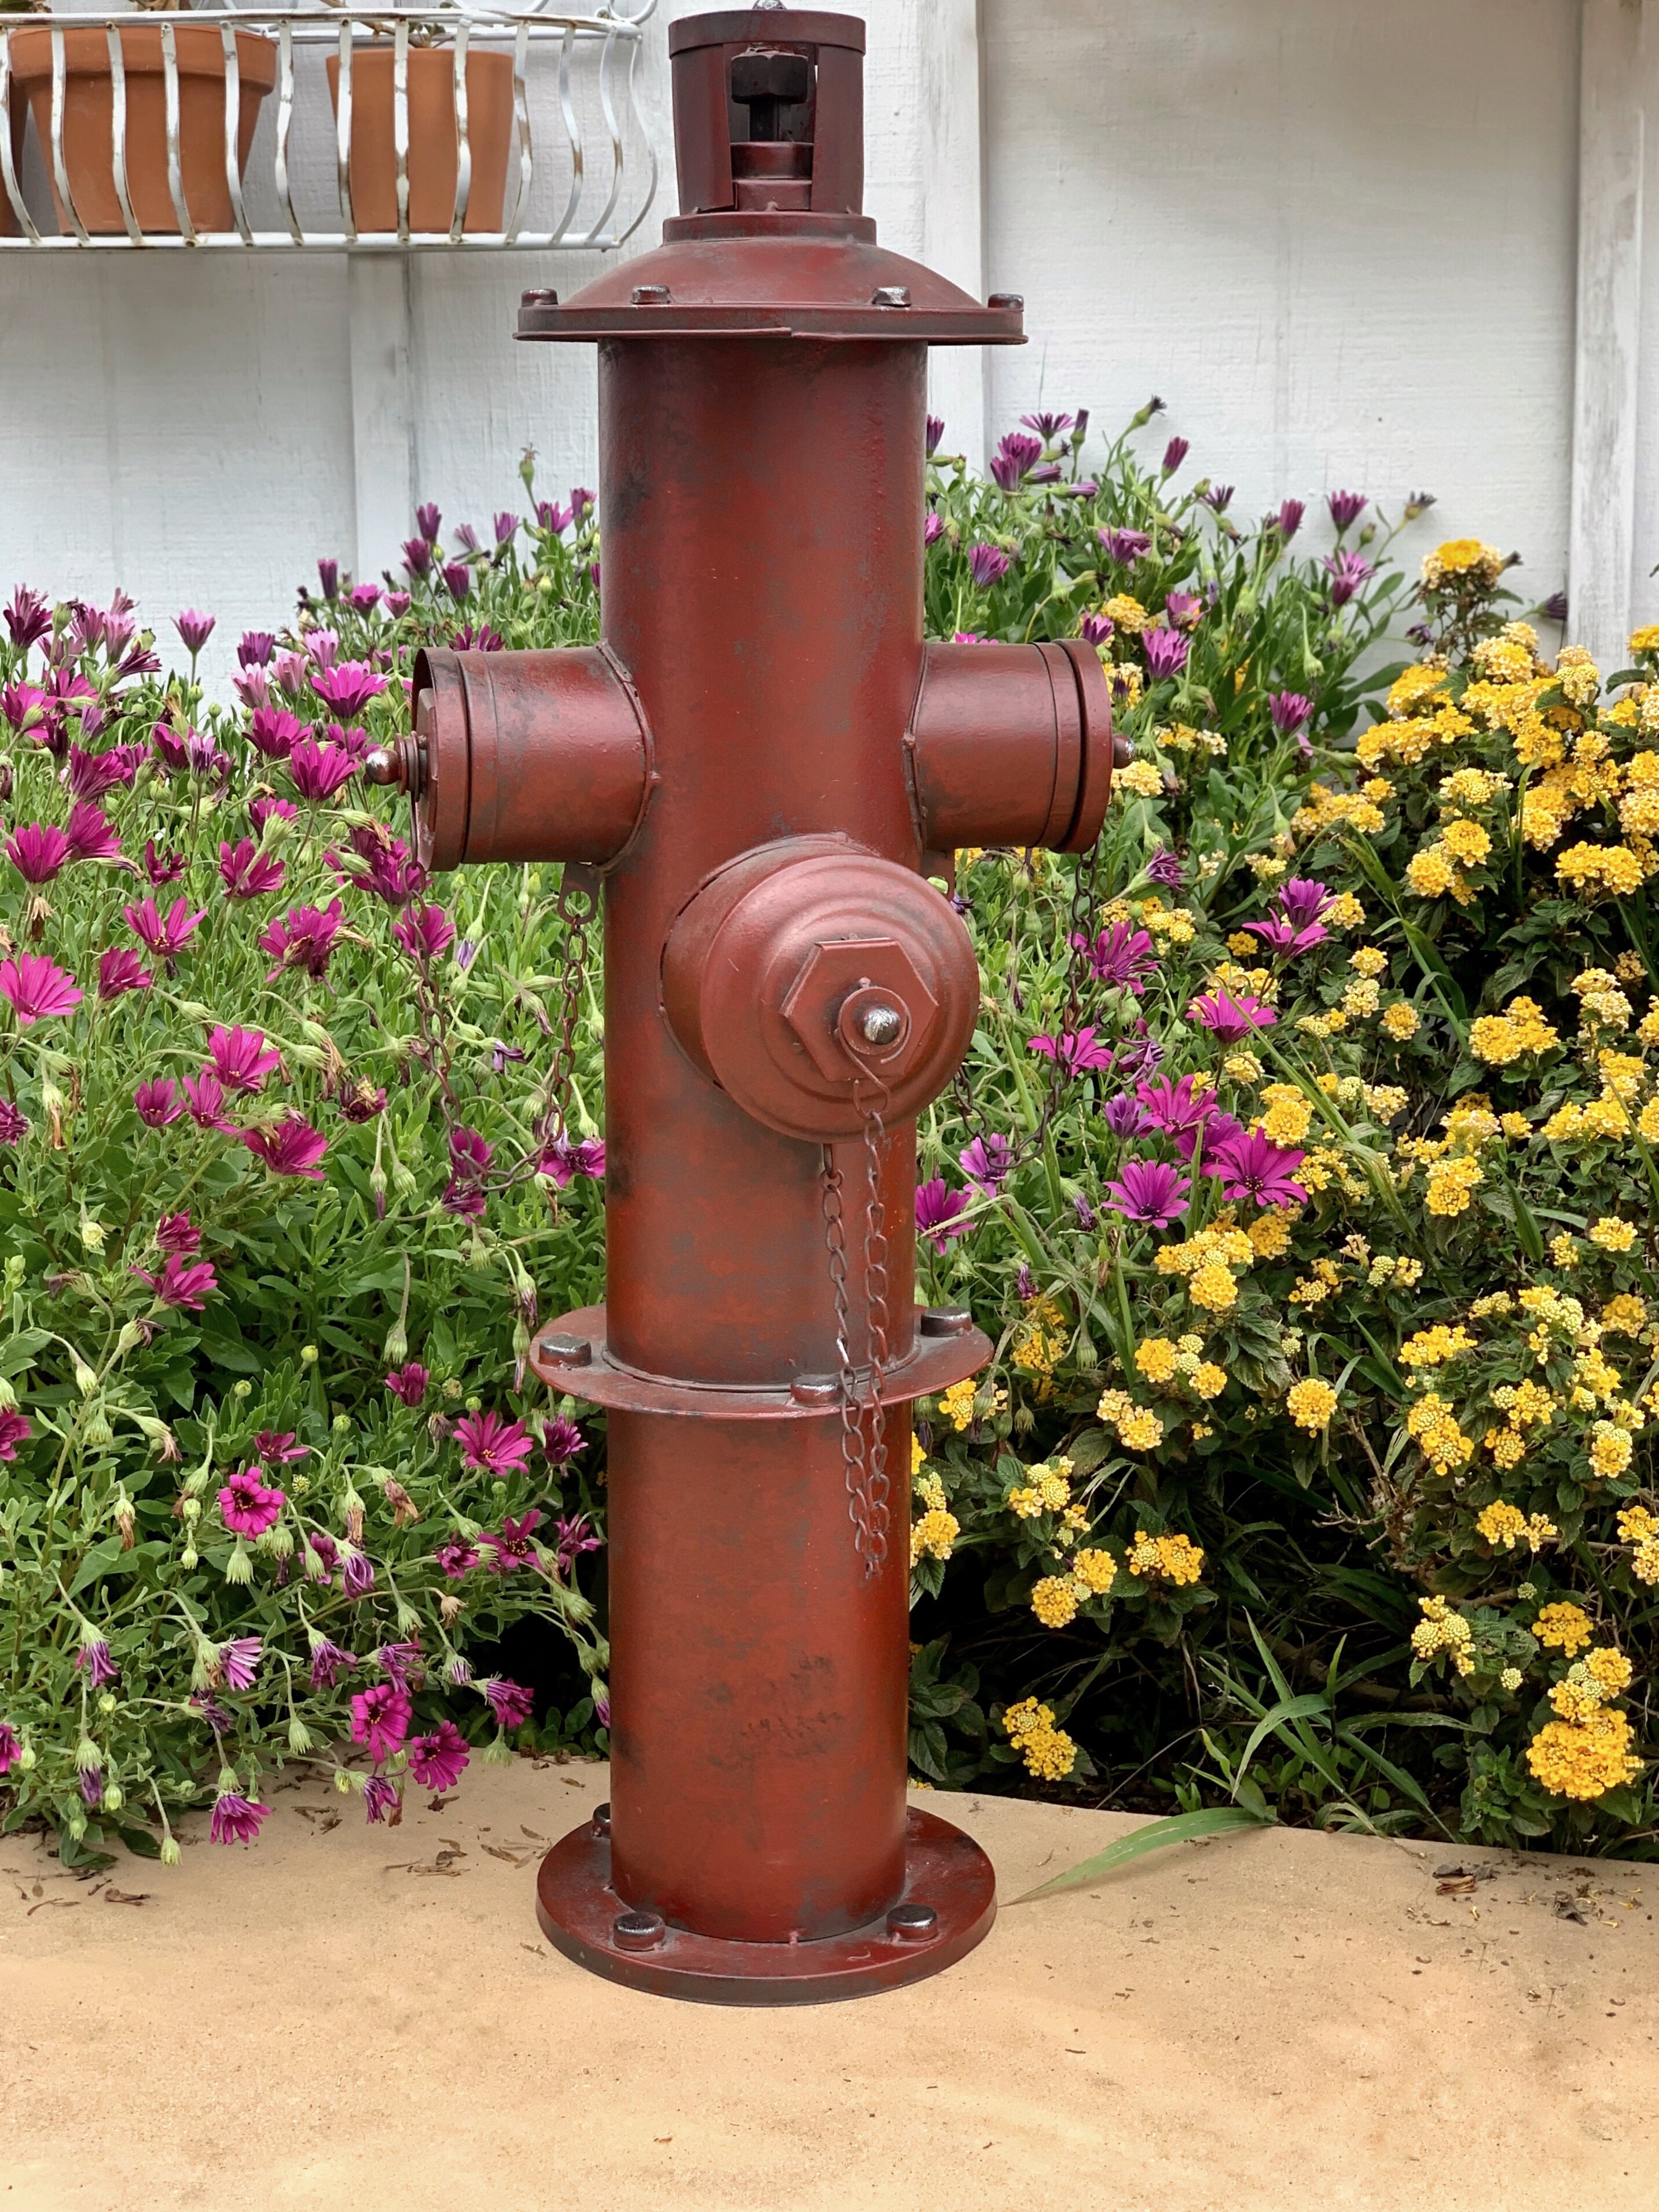 Vintage Style Fire Hydrant Statue Dogs Red Metal 3 Nozzle Patio Yard Decor 23 In